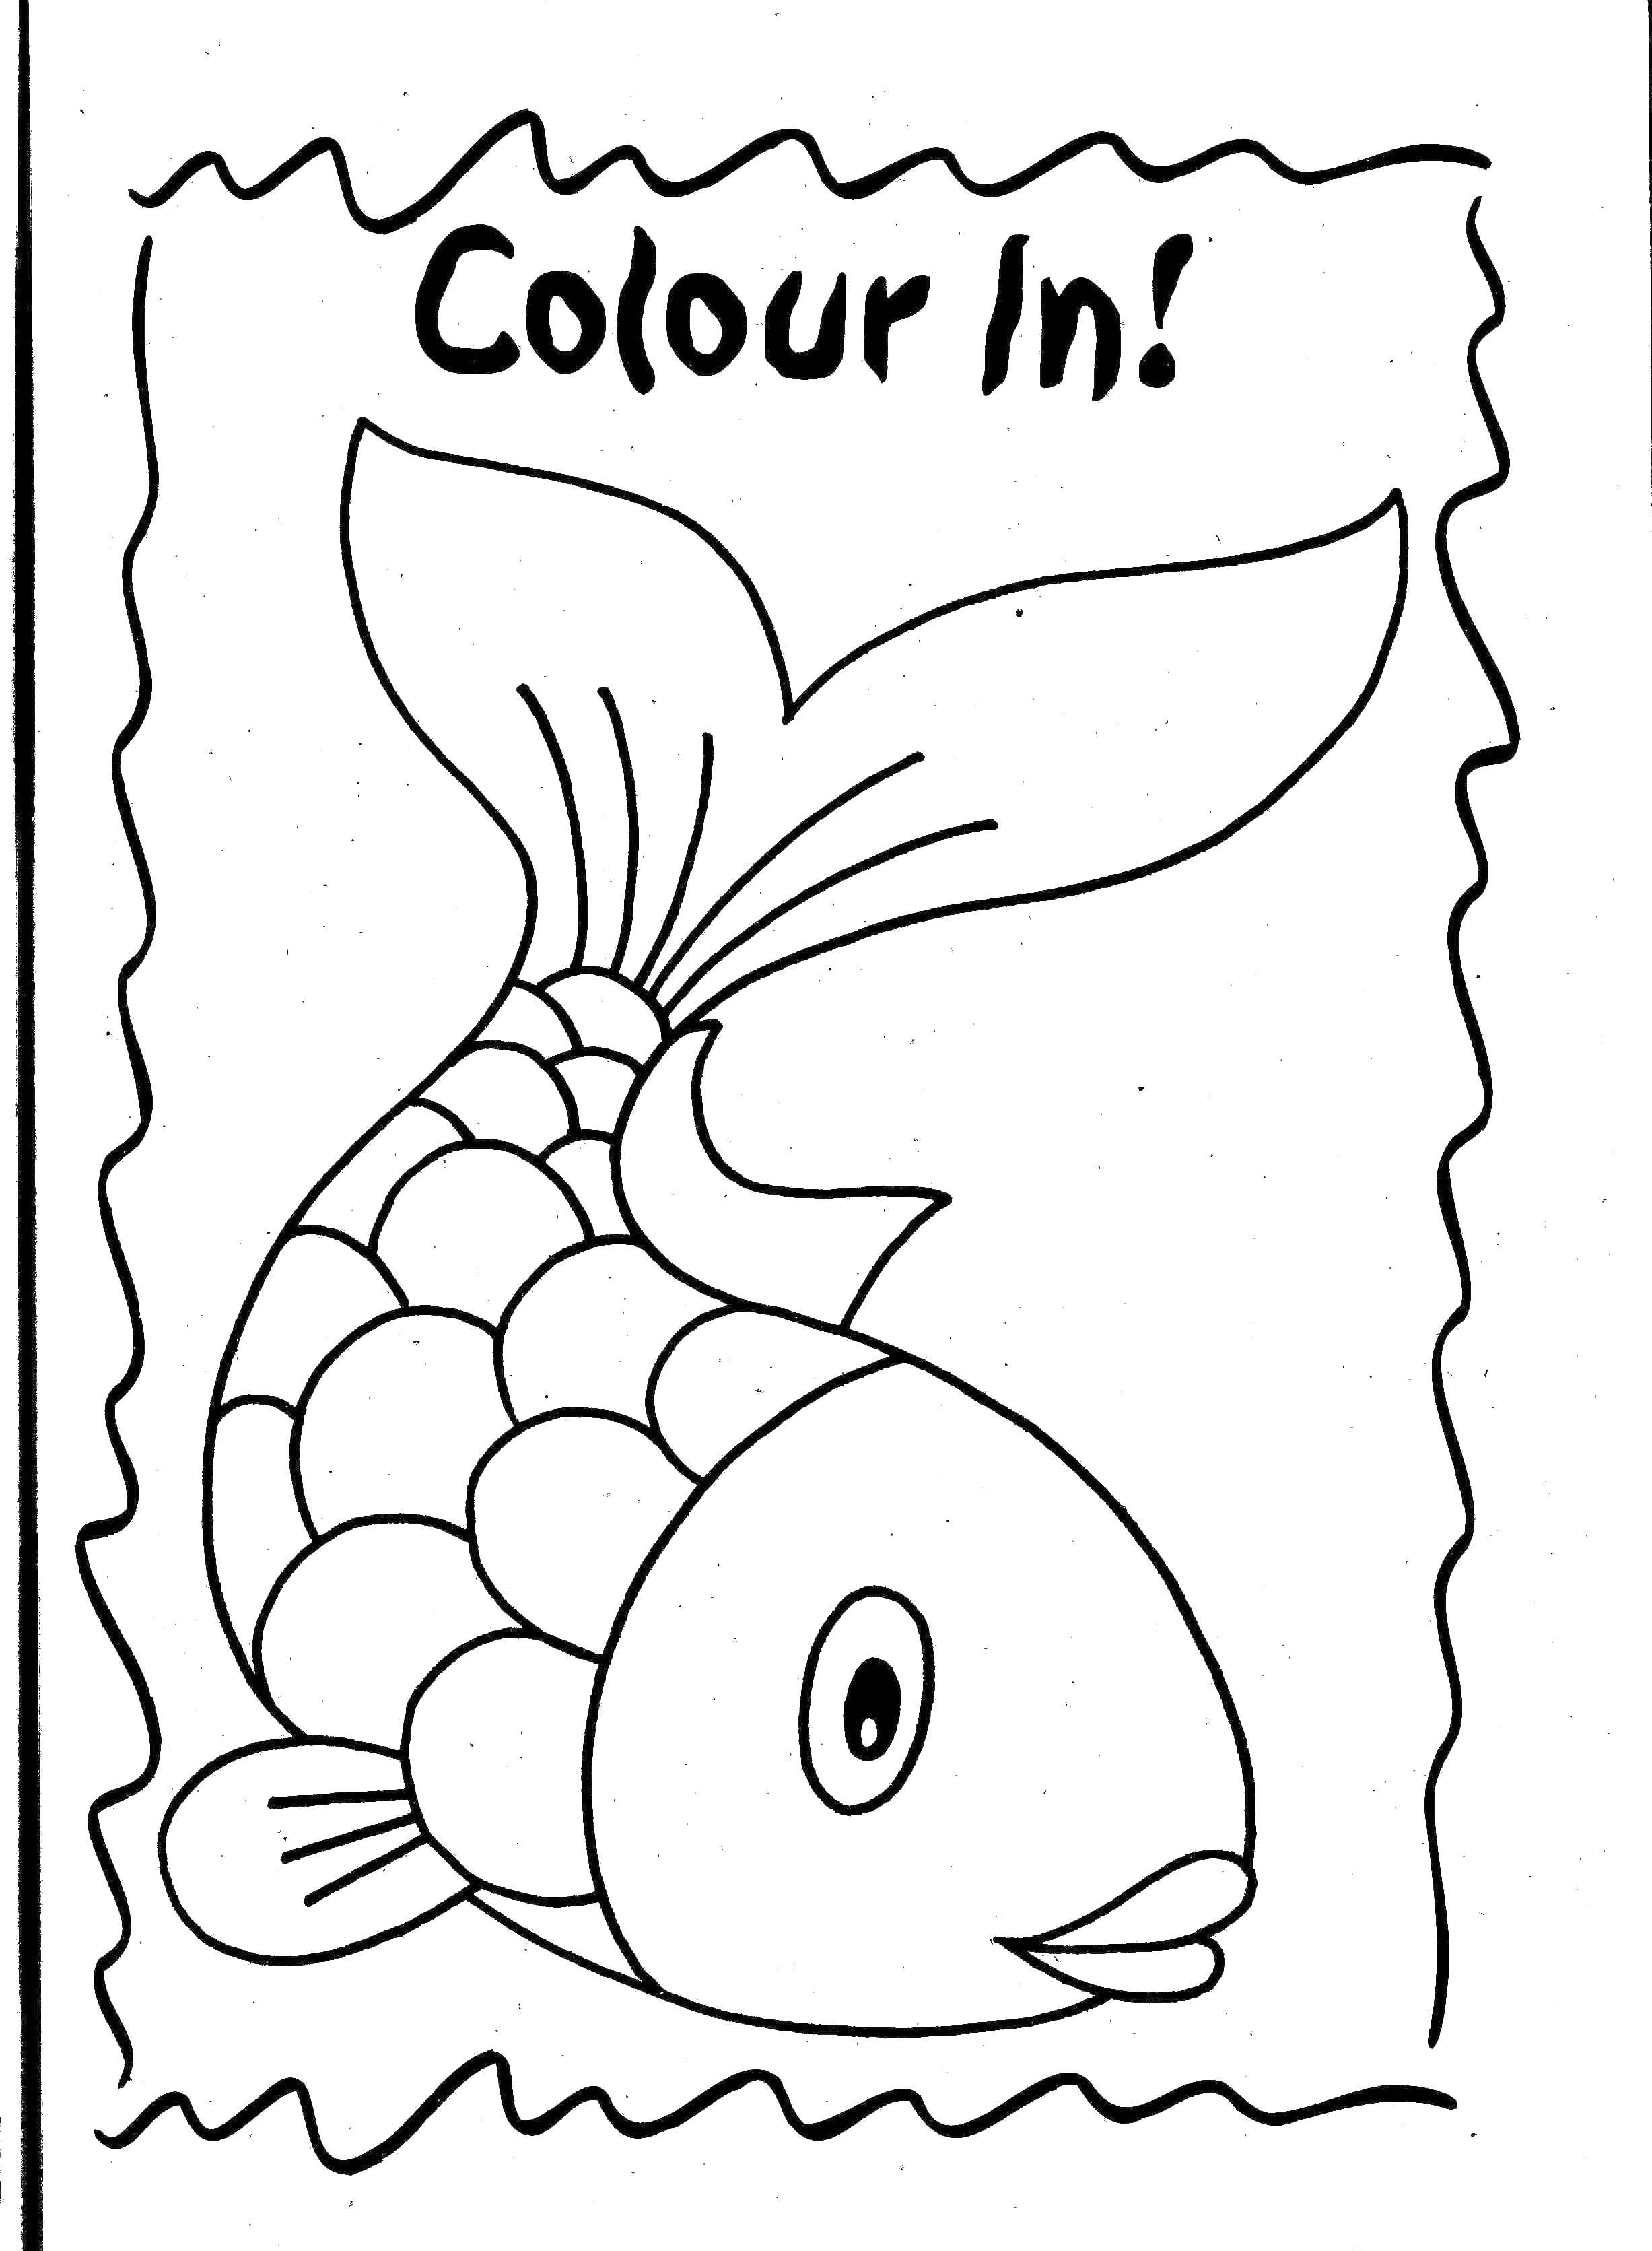 Coloring Fish with a large tail. Category Coloring pages for kids. Tags:  slaves, color, tail.